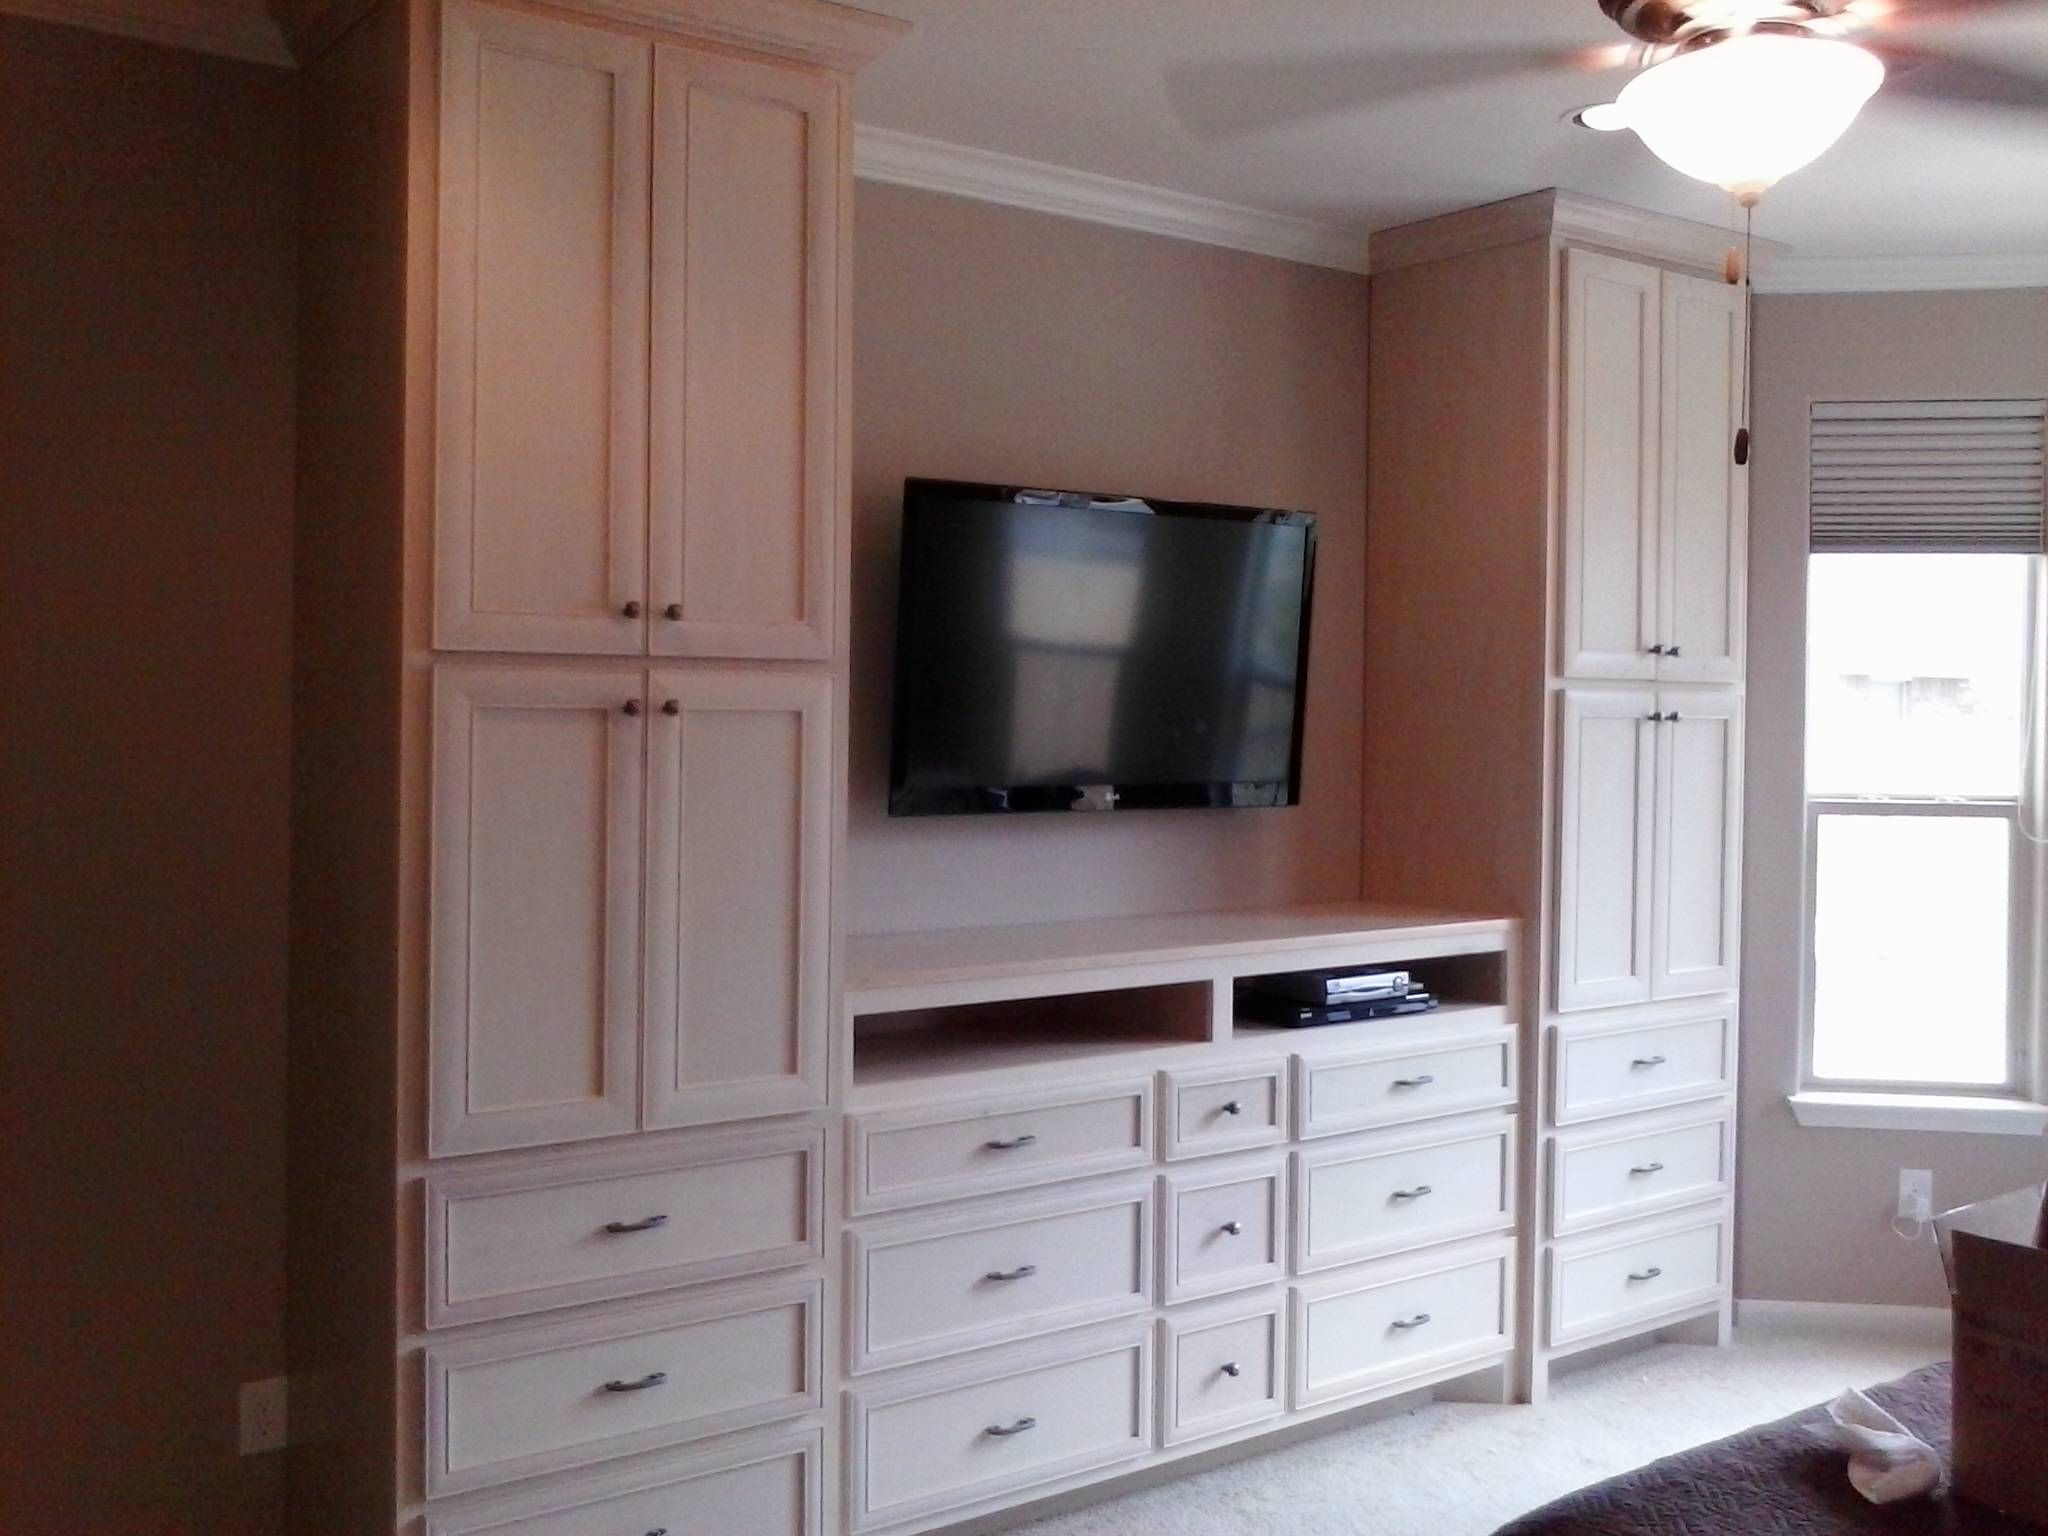 Bedroom Wall Storage Cabinets
 Astonishing Bedroom Wall Units for Interior and Decoration